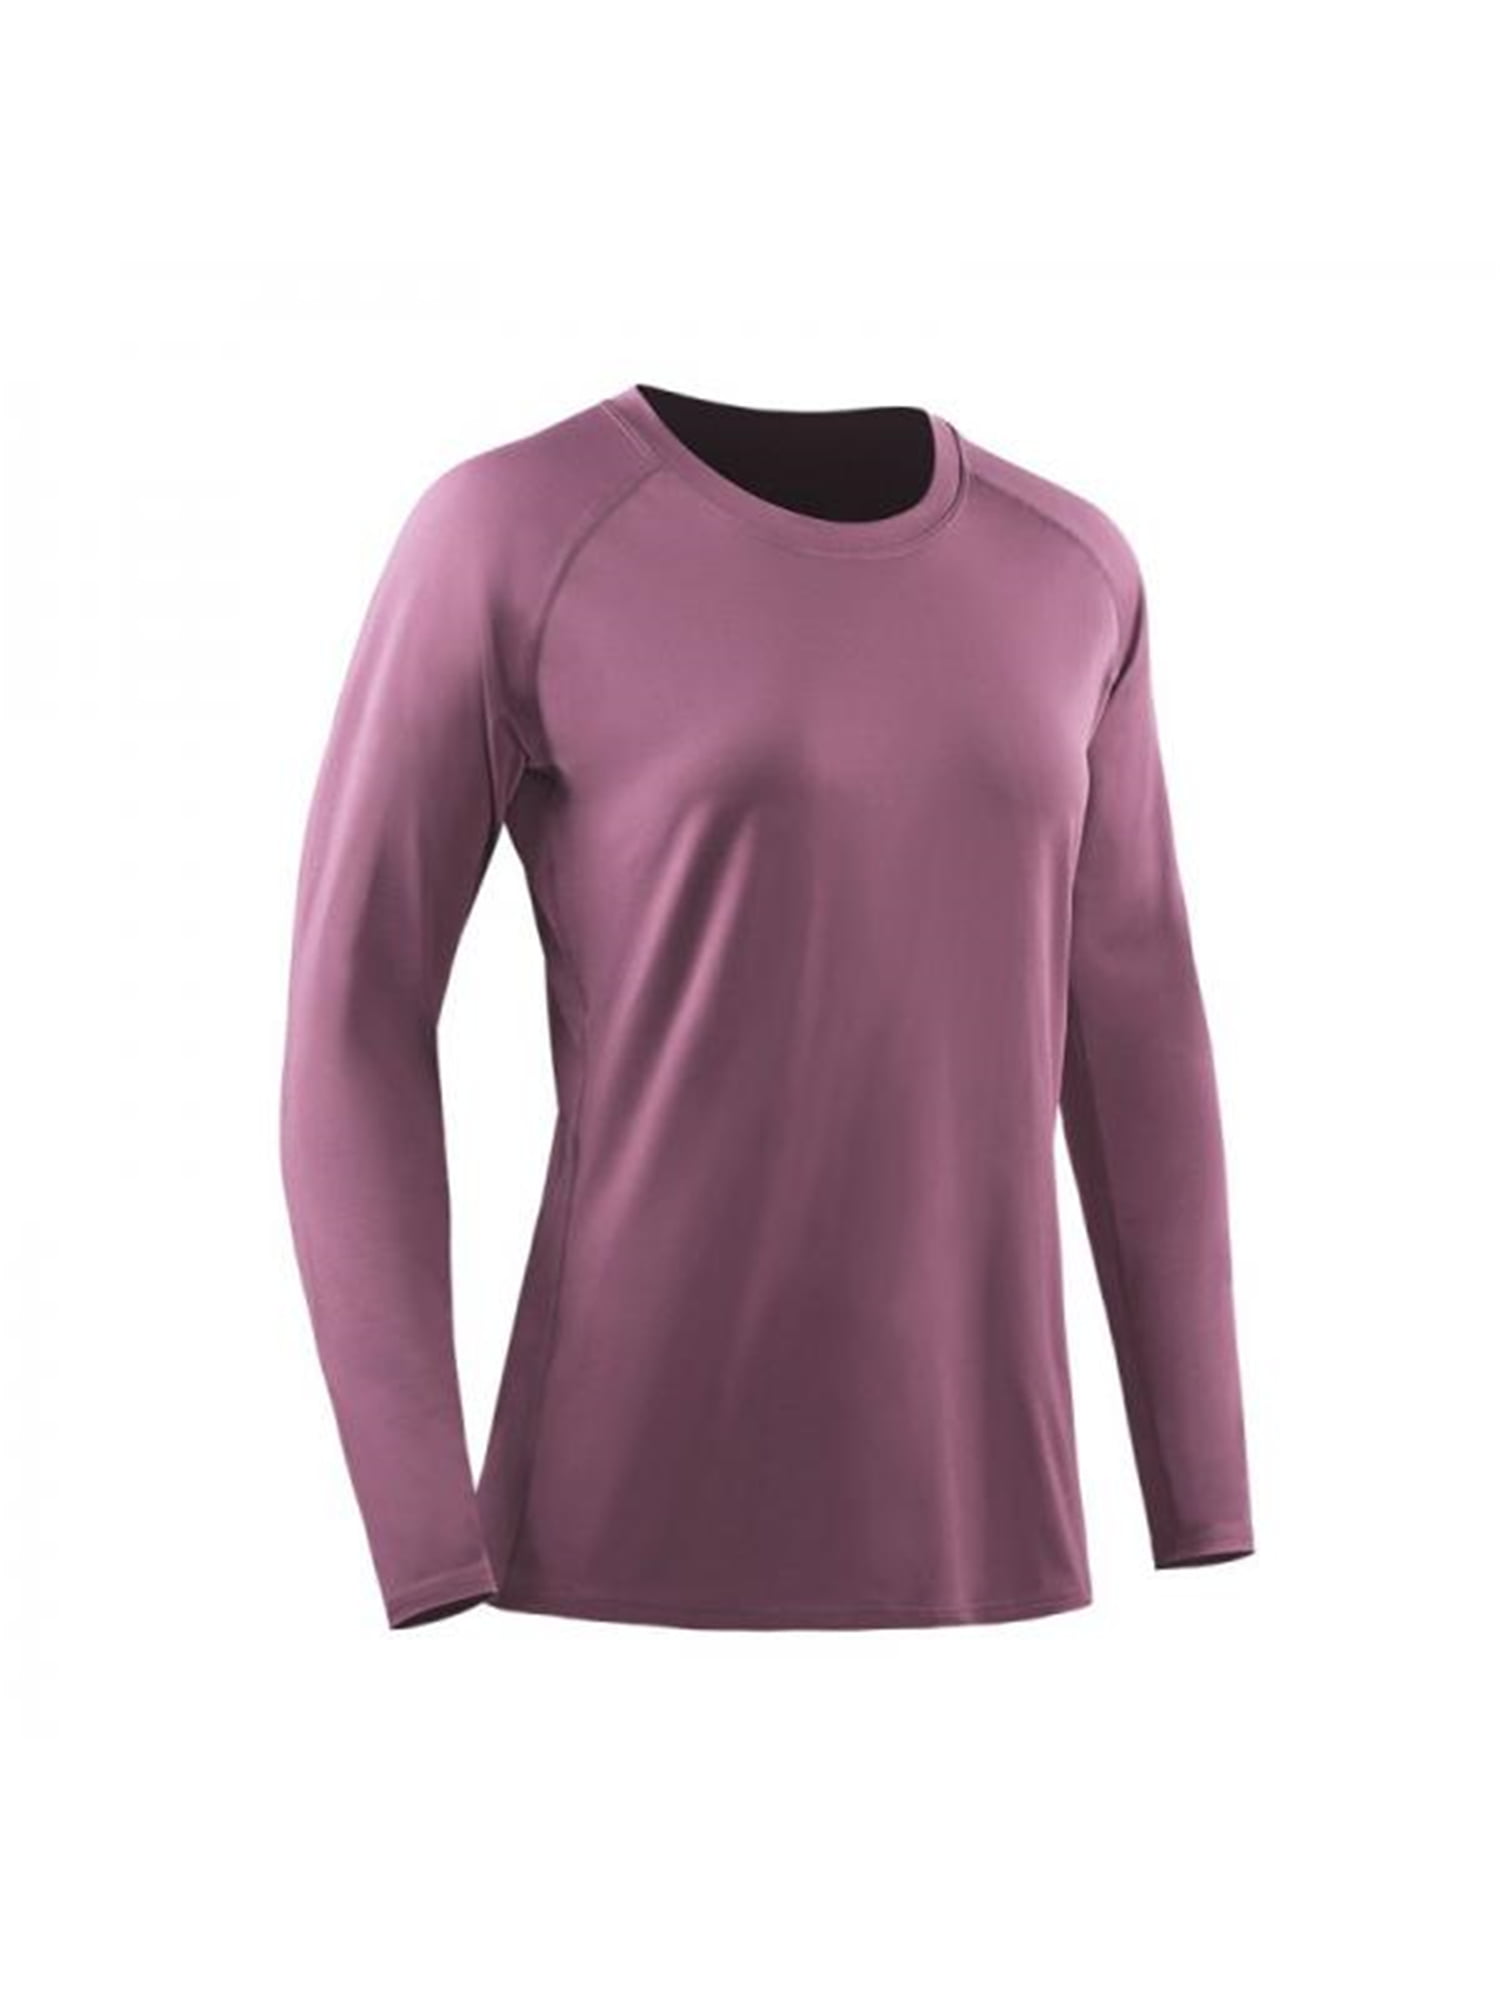 Details about   Quick Dry Running T-Shirts Outdoors Men Tops Slim  breathable Absorb sweat shirt 